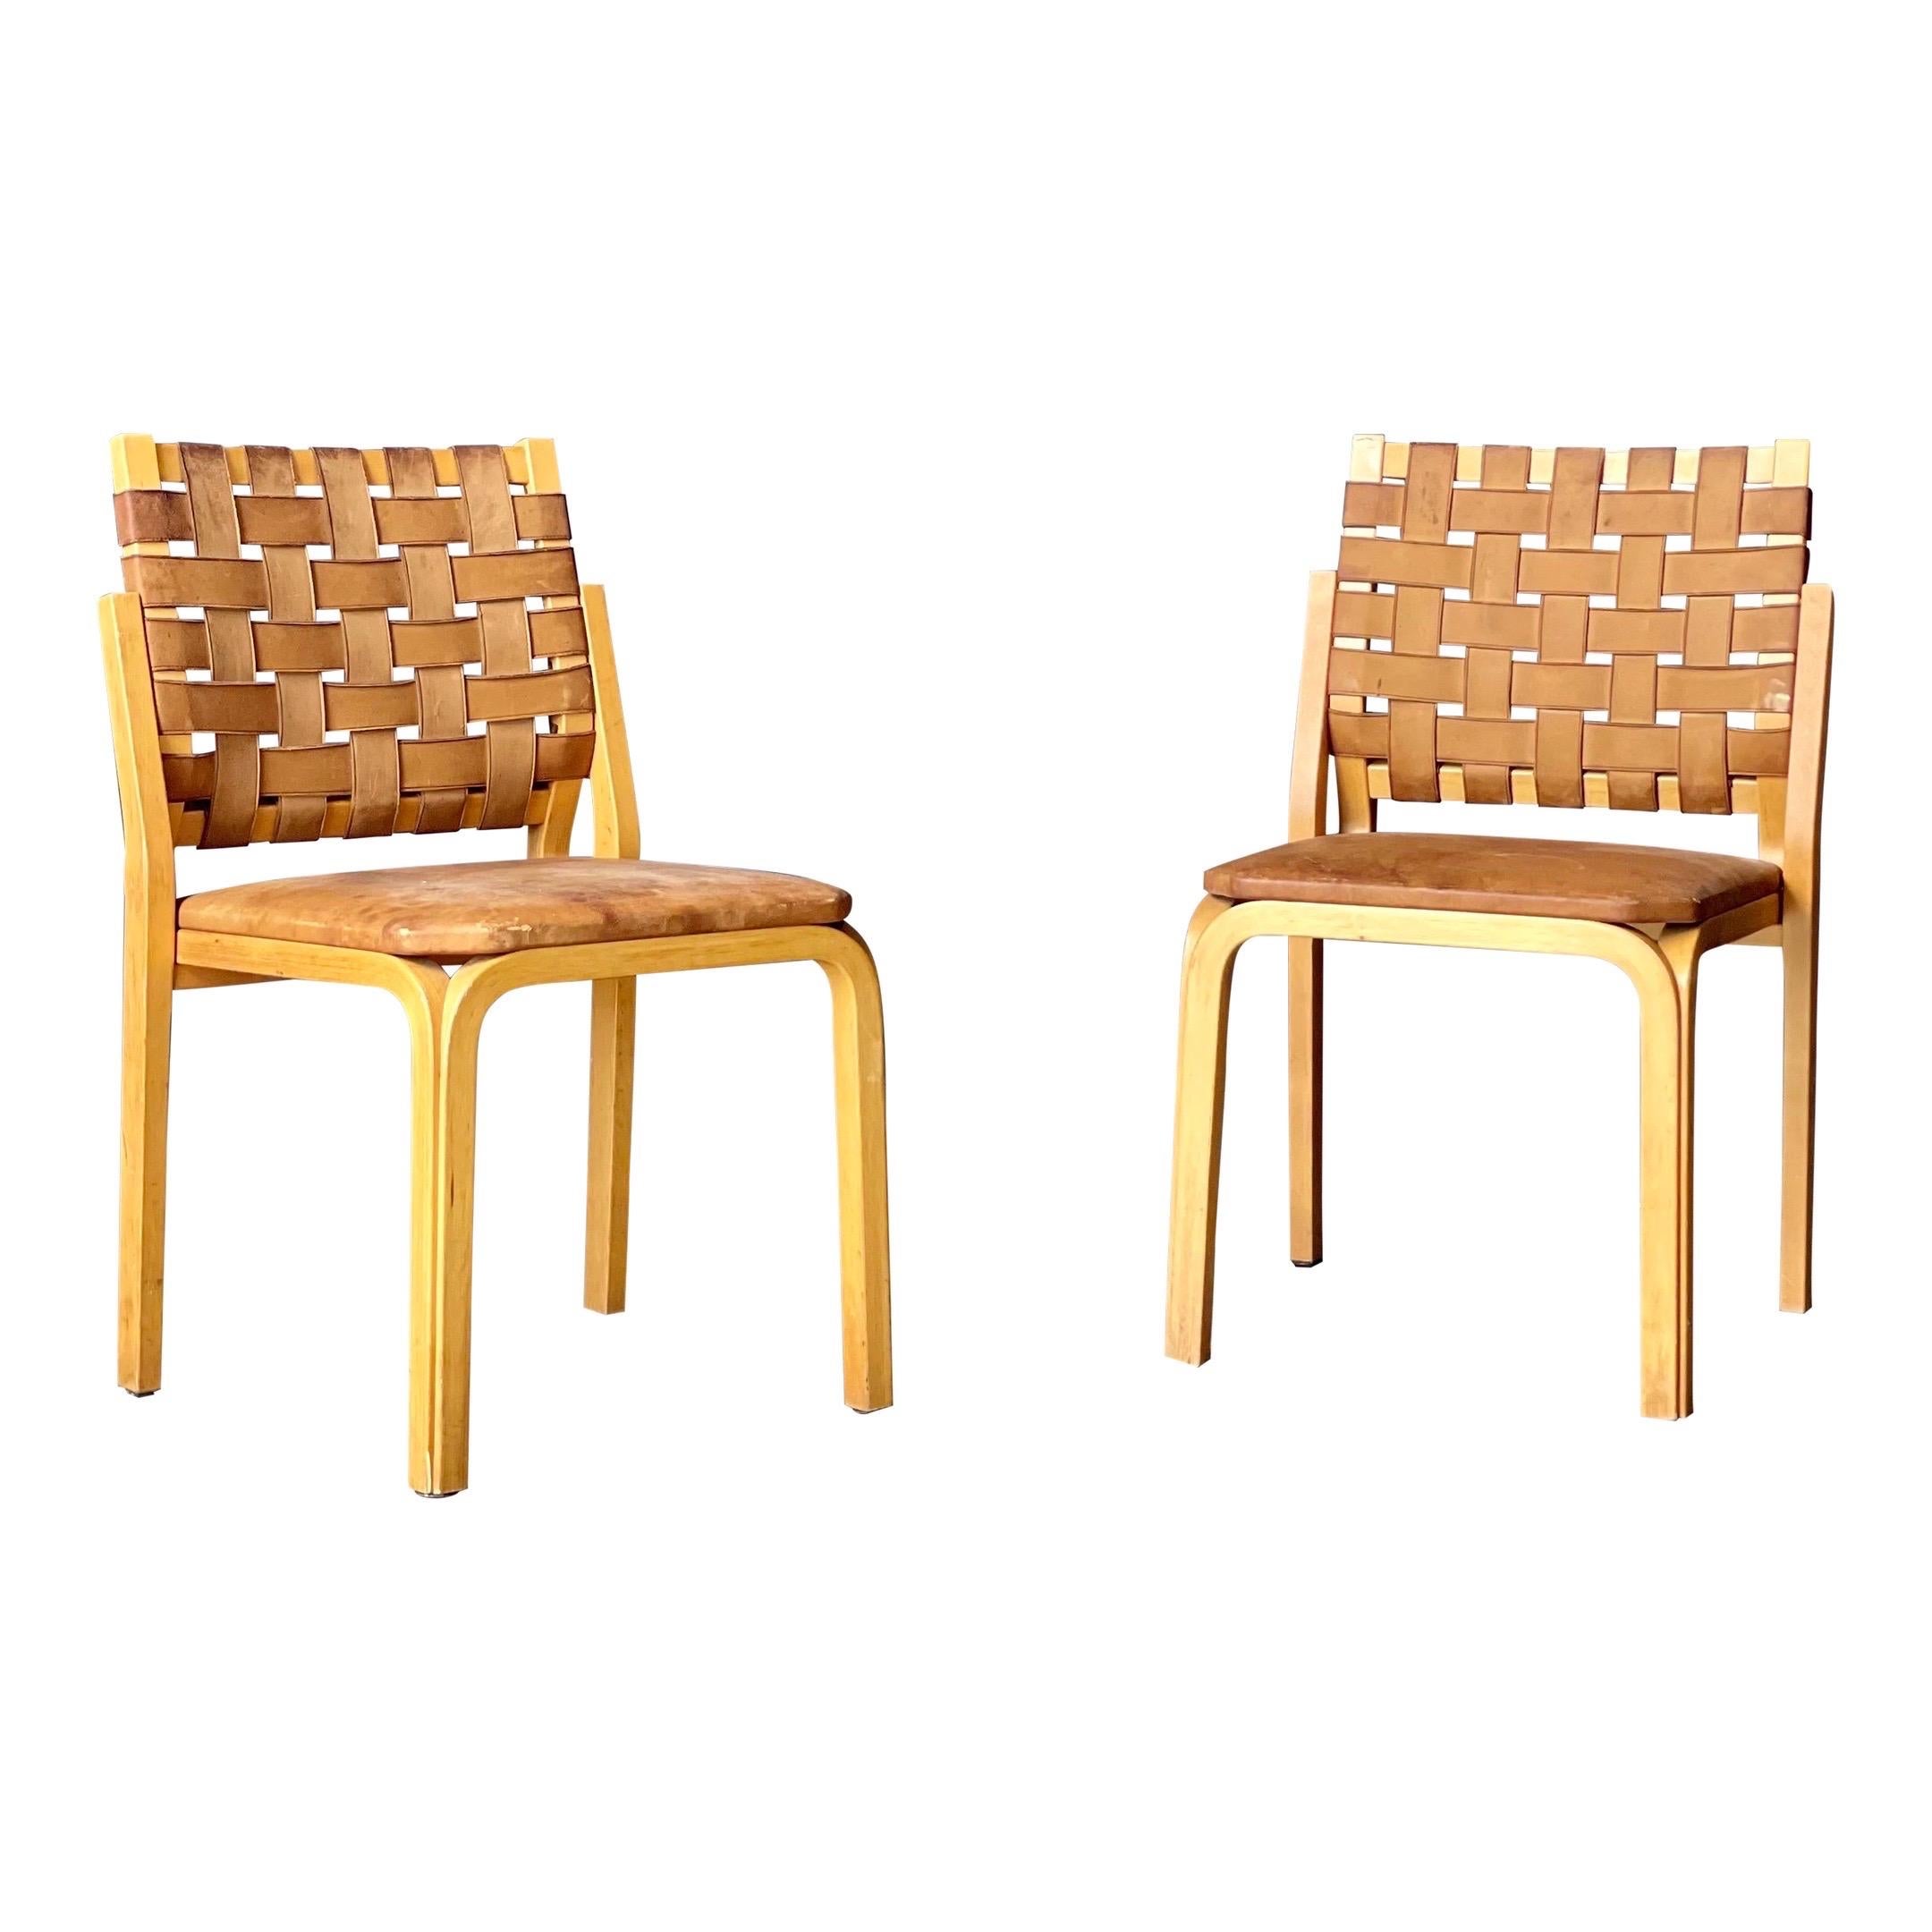 Woven Leather Bentwood Chairs - a Pair For Sale